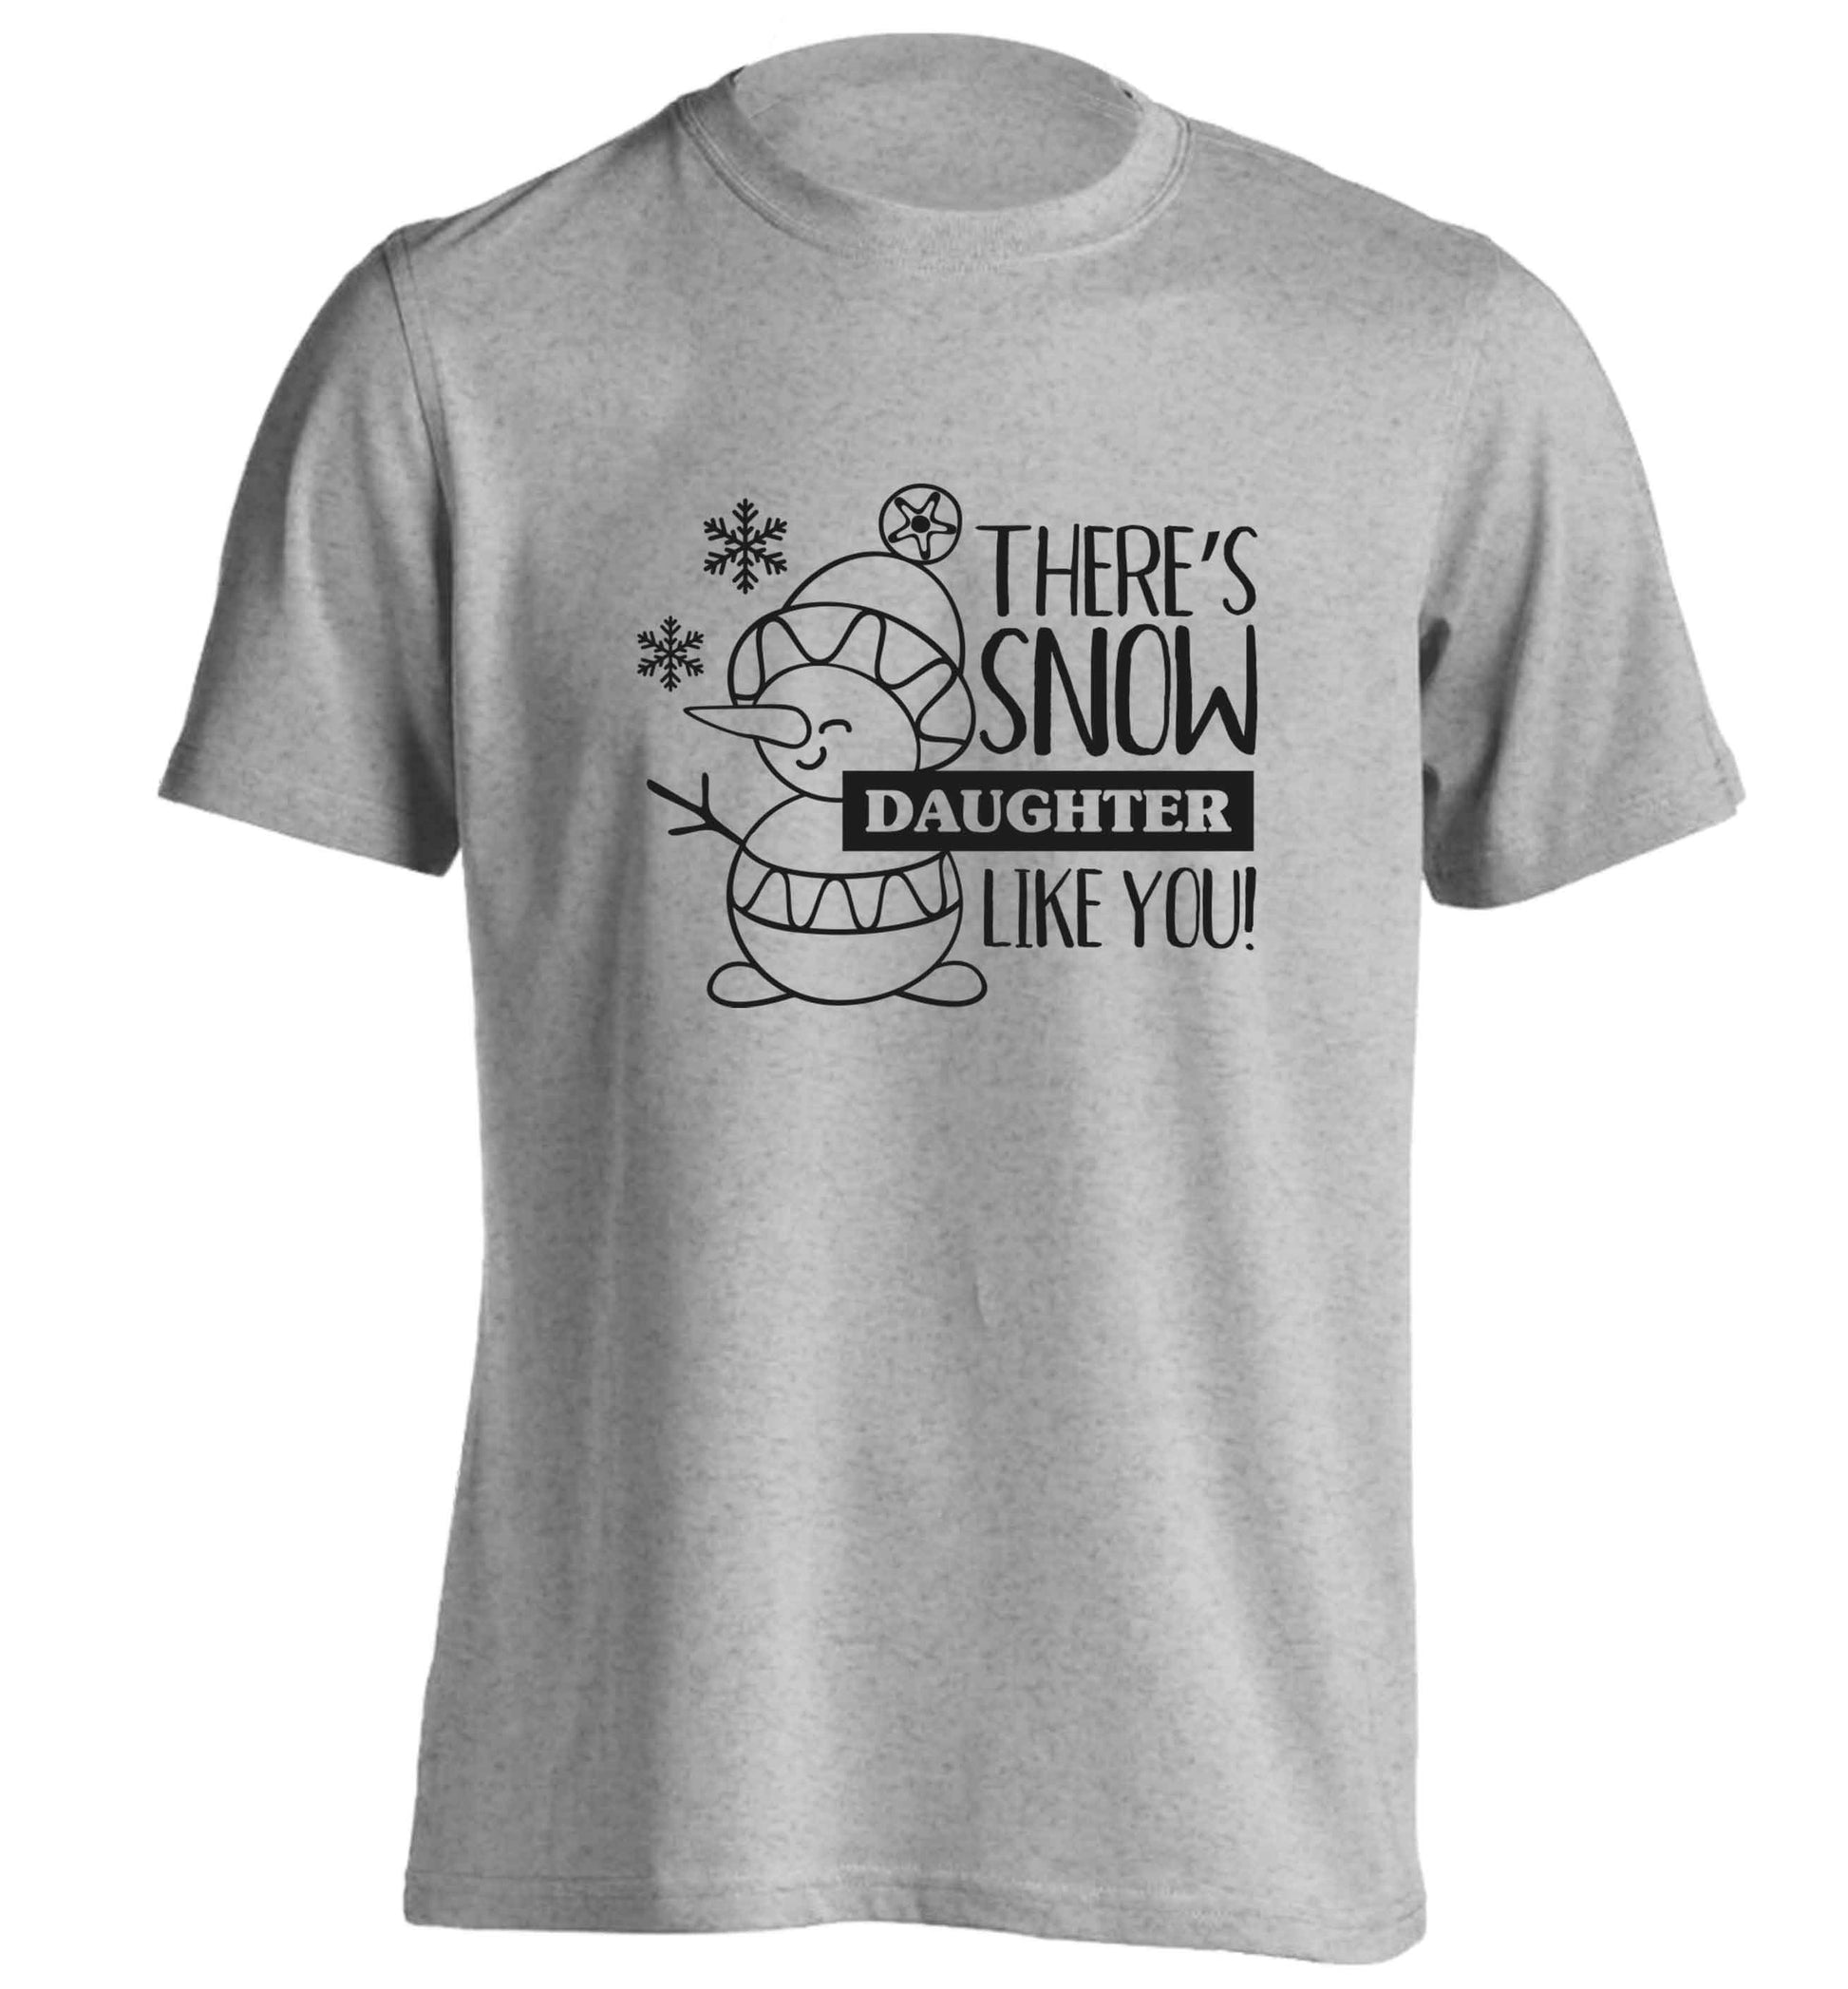 There's snow daughter like you adults unisex grey Tshirt 2XL